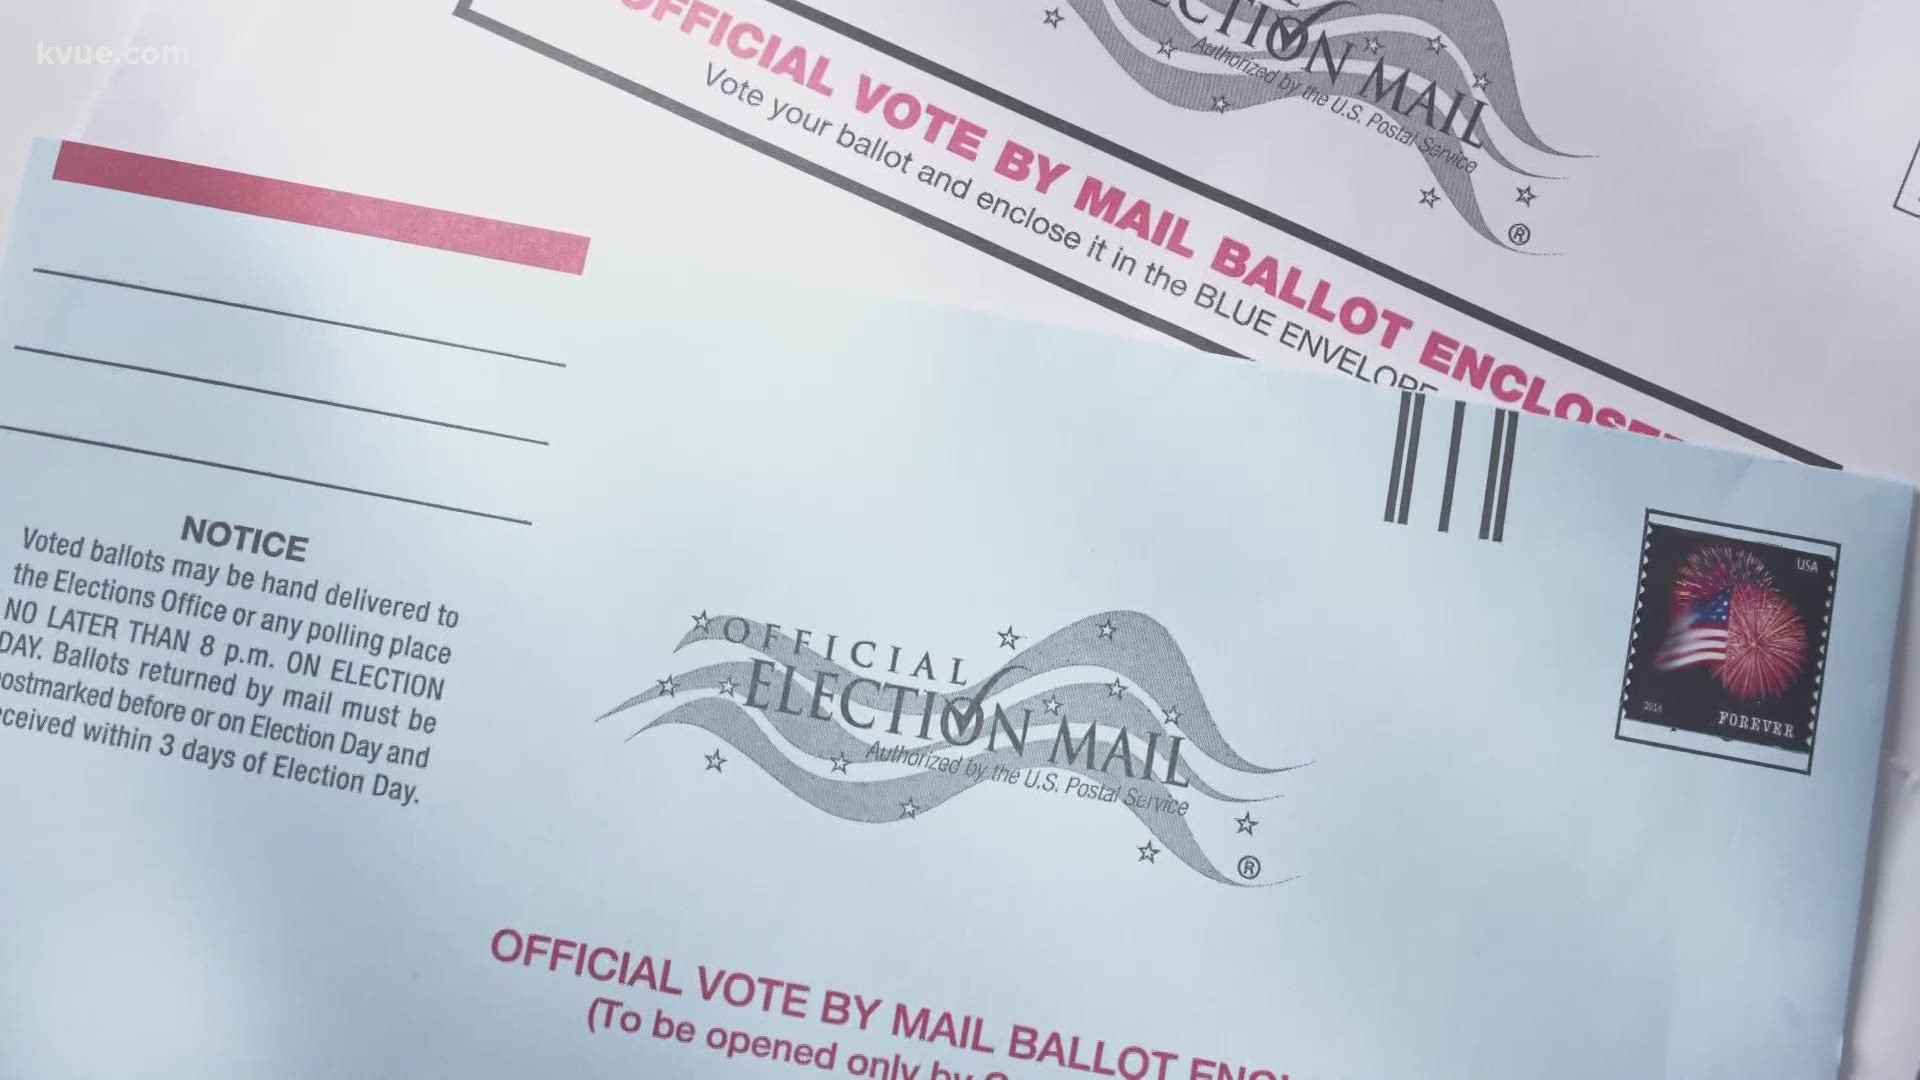 The Texas Democratic Party had challenged the state's age restrictions on voting by mail, arguing they violated the 26th Amendment's protections.